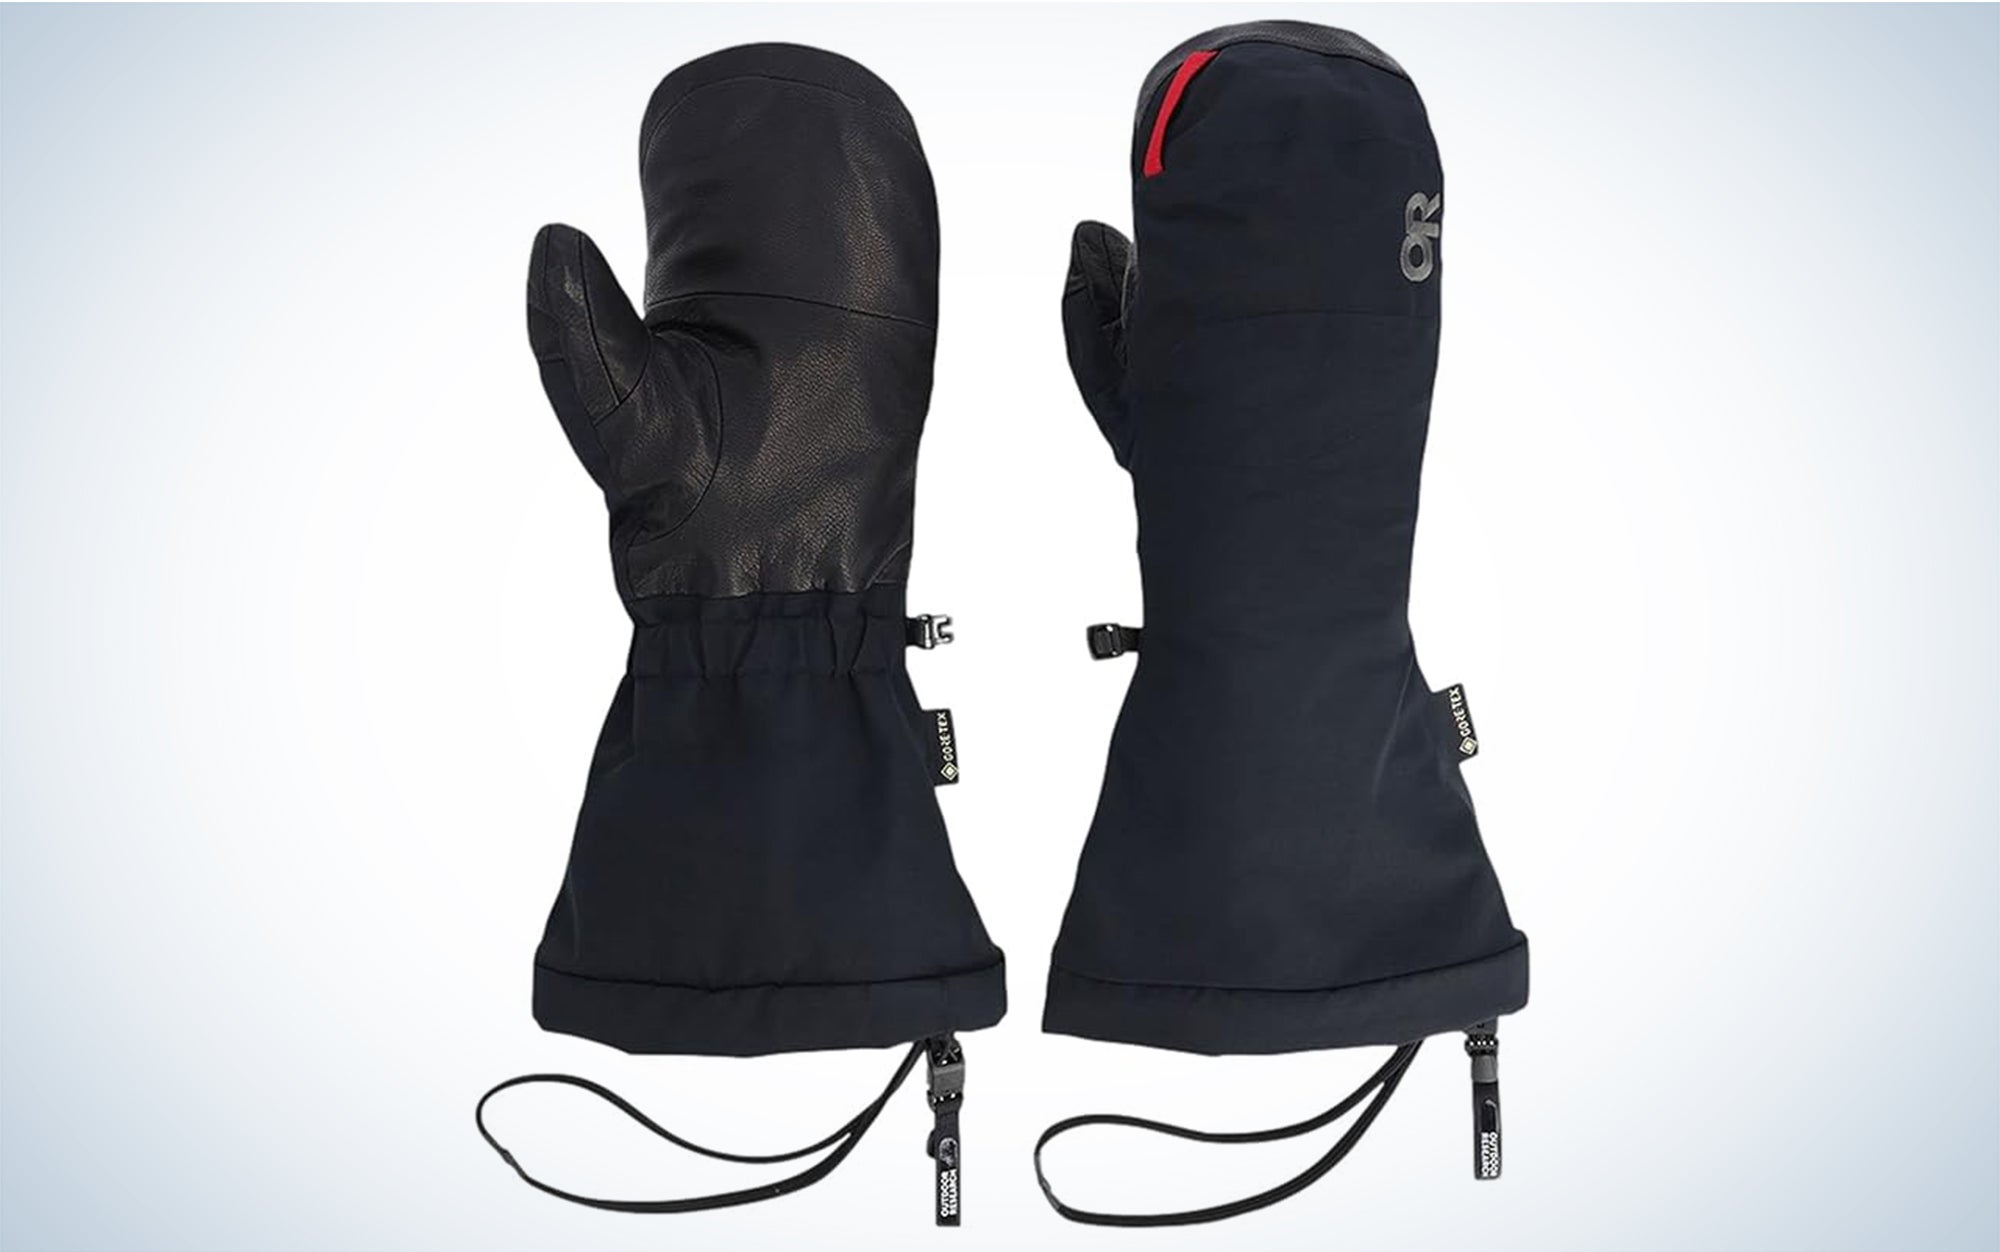 We tested the Outdoor Research Alti II Gore Tex Mitts.